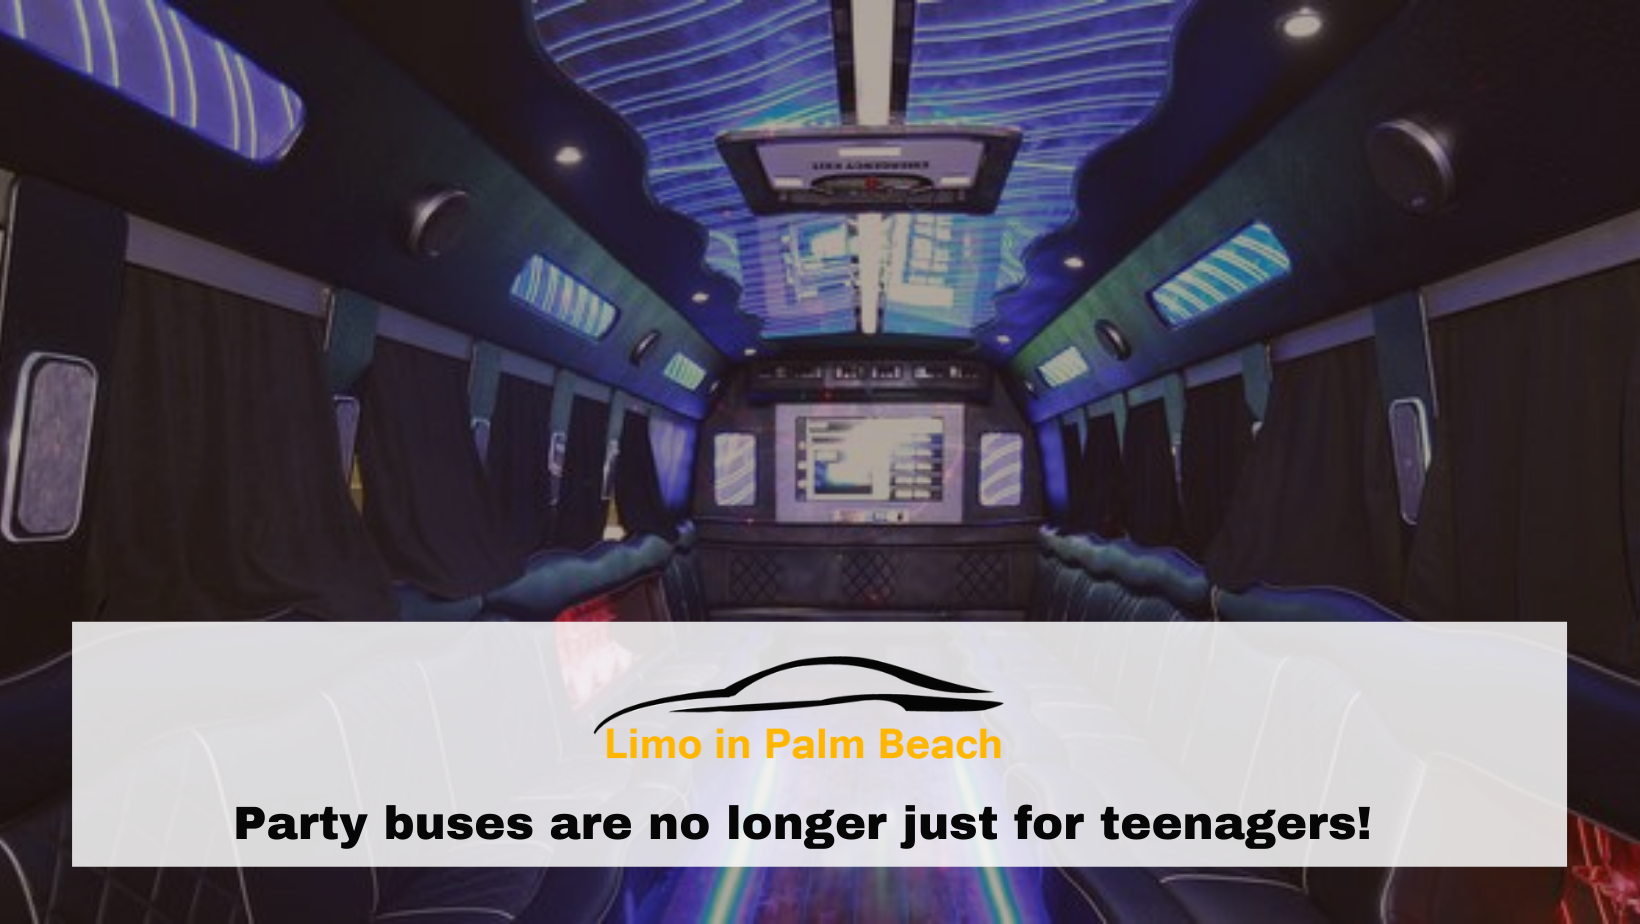 Party buses are no longer just for teenagers!